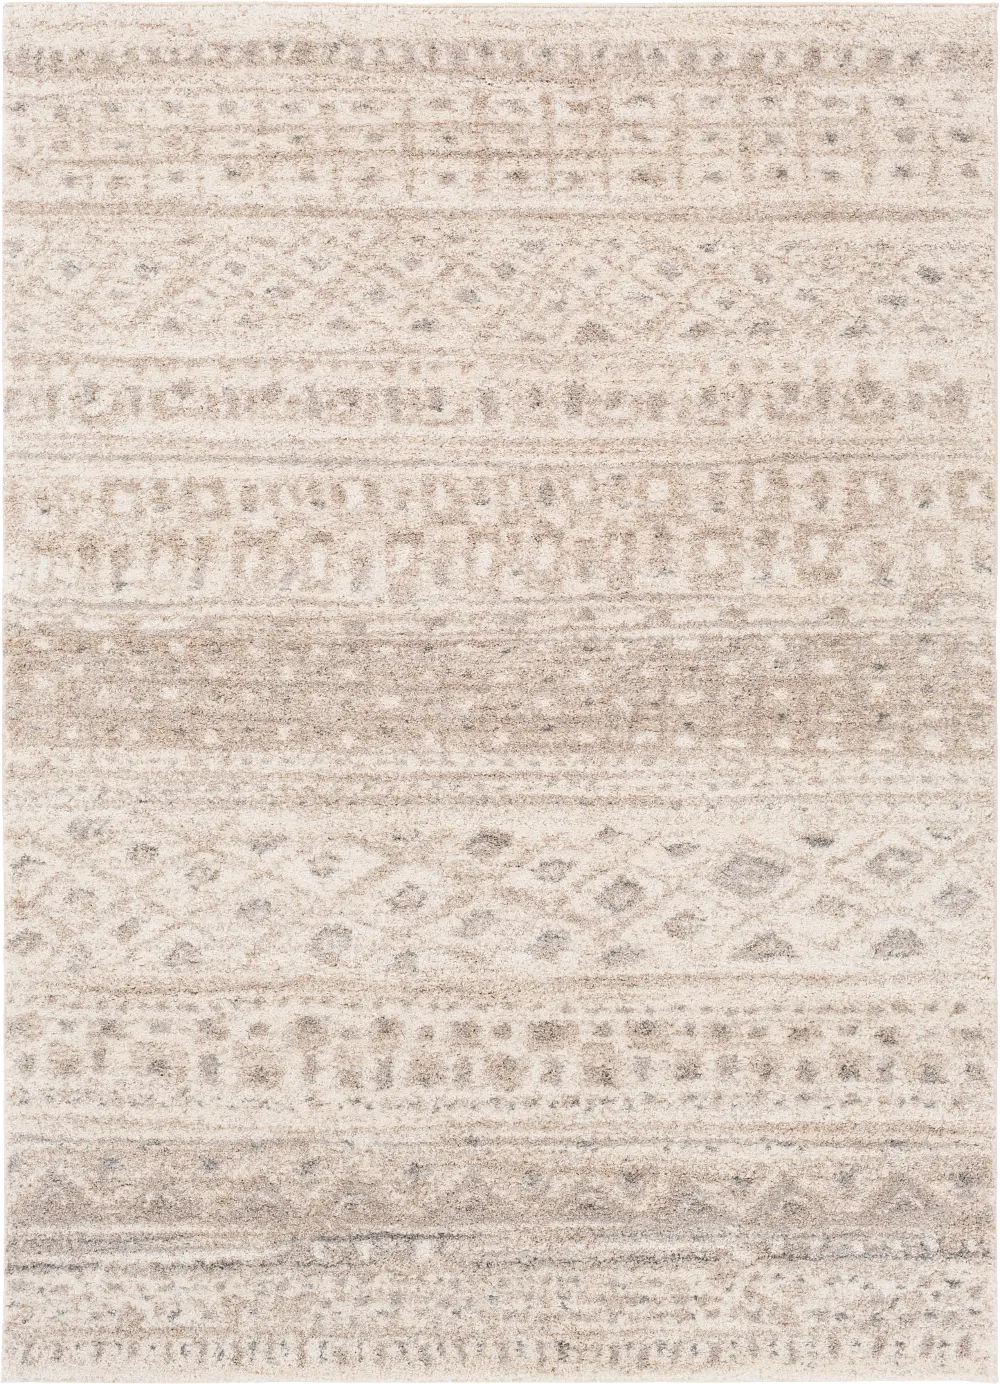 8 x 10 Ivory High Pile Woven Rug - Fowler-1